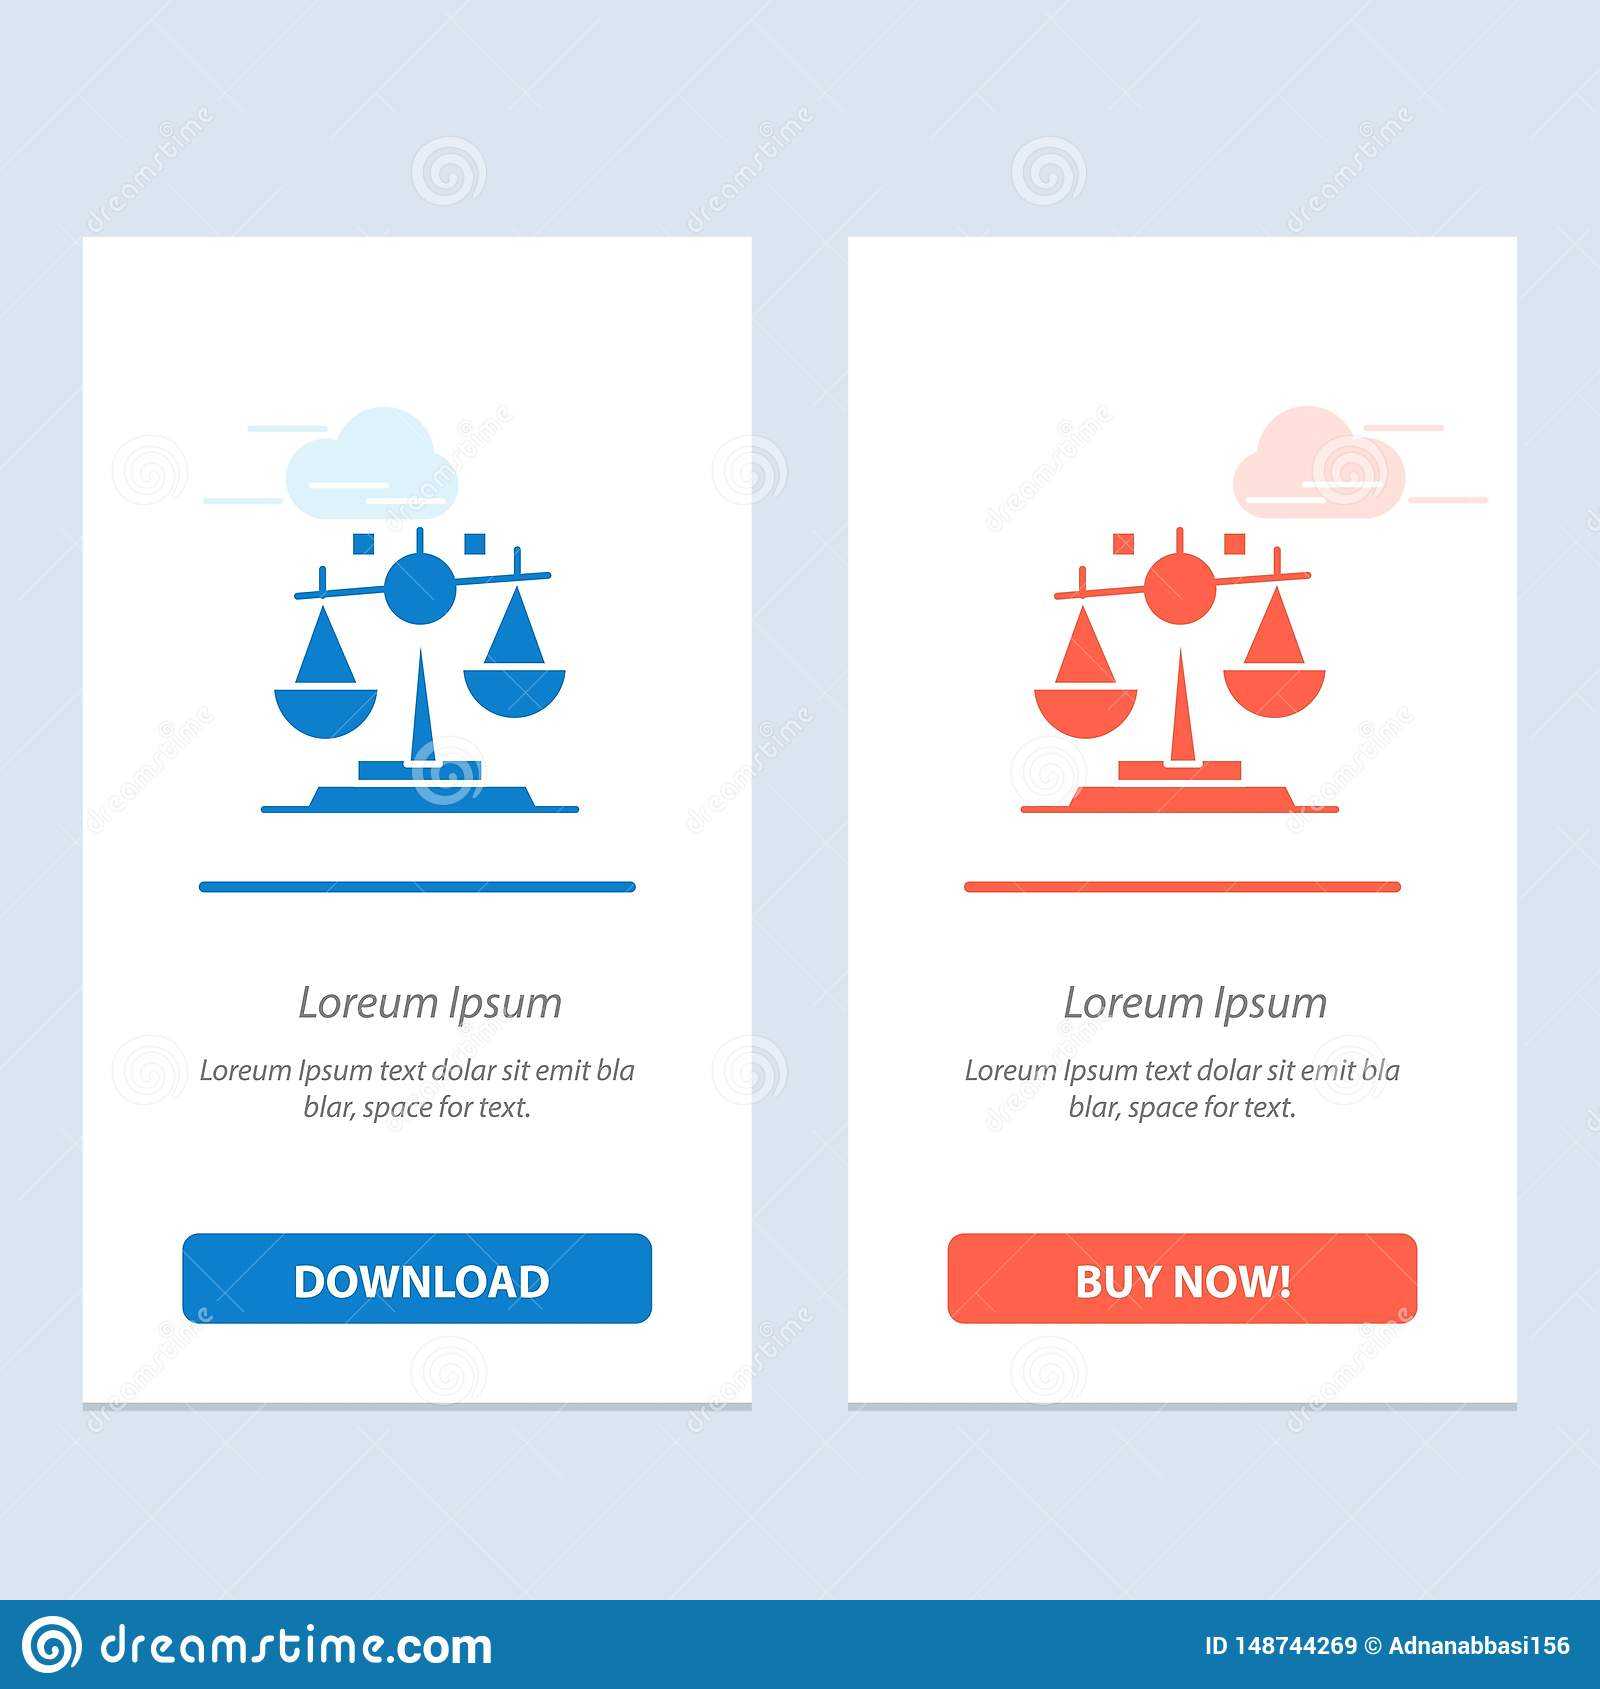 Balance, Law, Justice, Finance Blue And Red Download And Buy In Decision Card Template